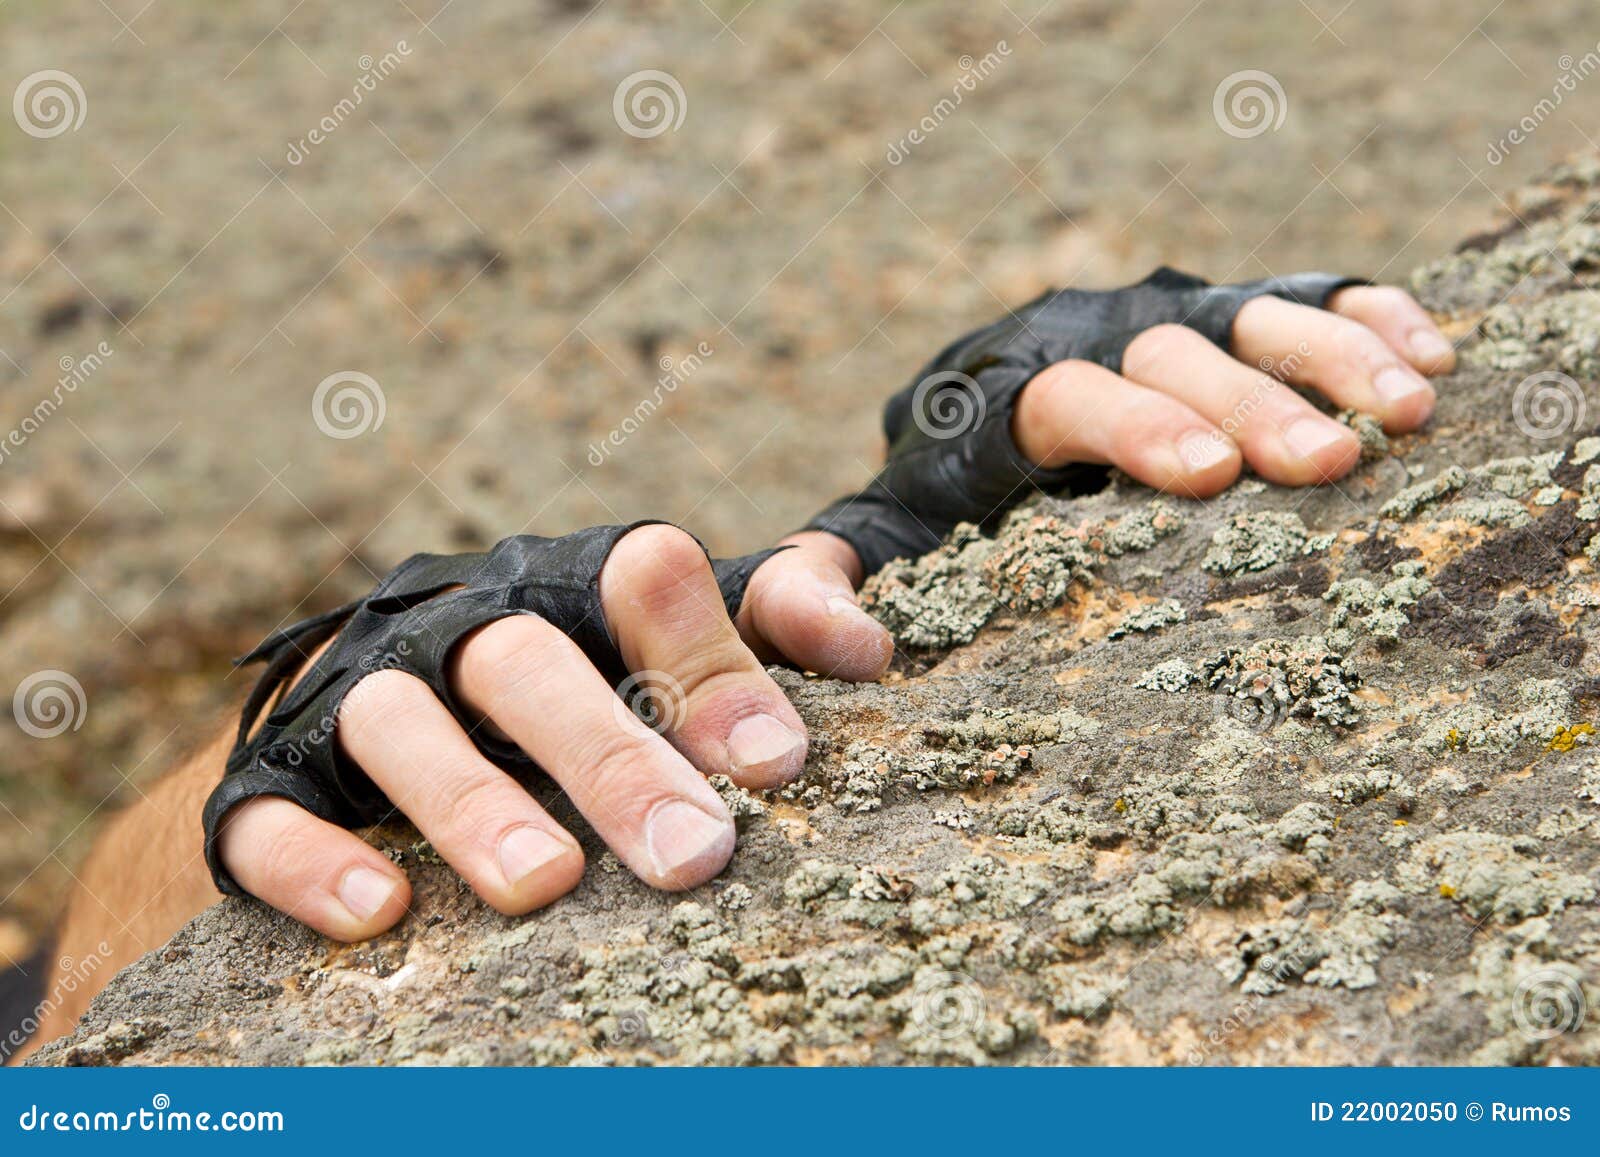 Two Hands Of Rock-climber Hanging On Stone Stock Photo - Image: 22002050